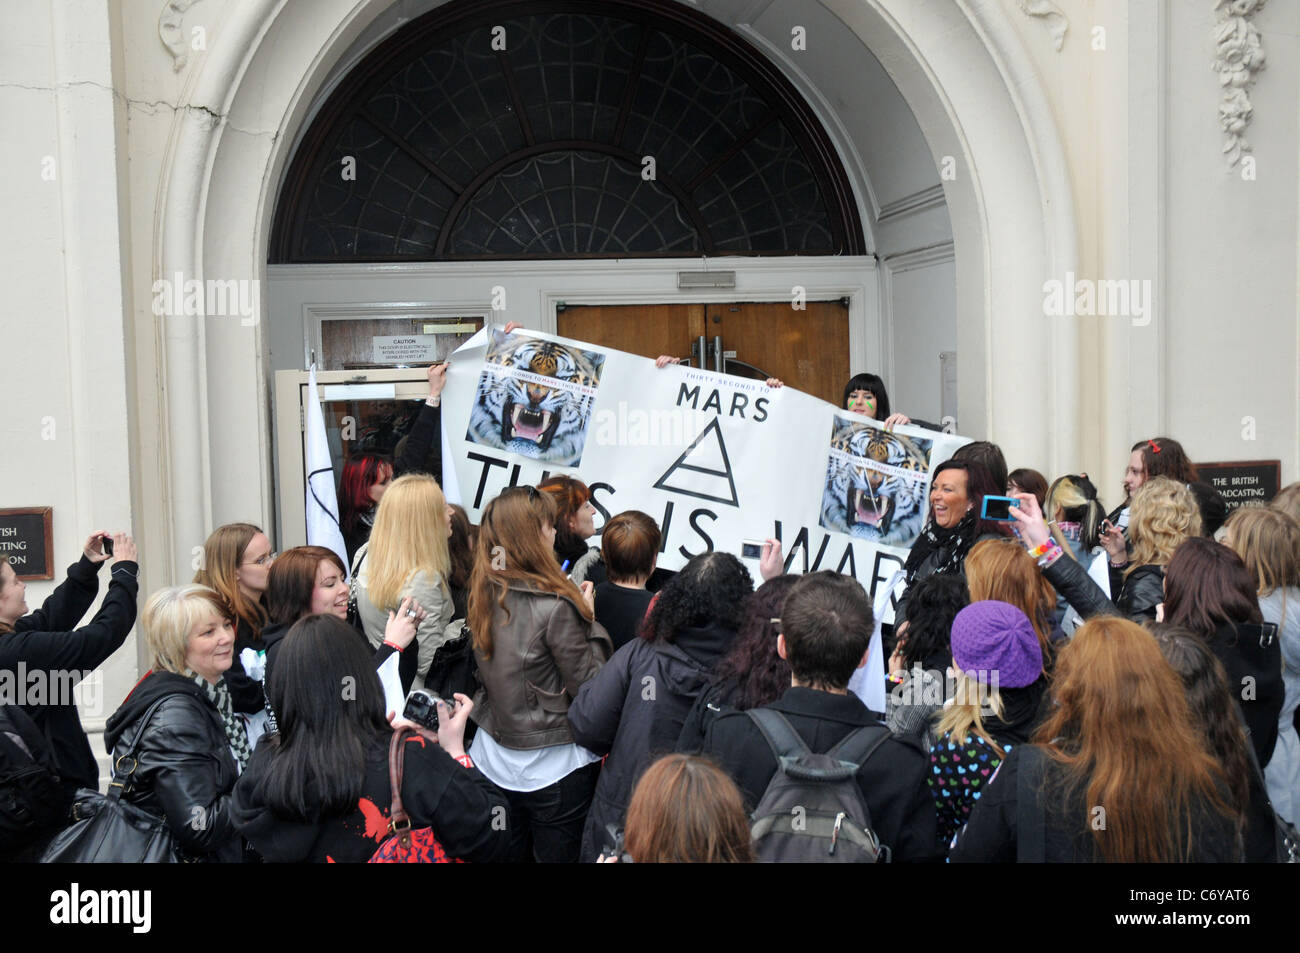 Atmosphere - Fans Jared Leto, Shannon Leto and Tomo Milicevic from the band '30 Seconds to Mars' arriving at the XFM radio Stock Photo